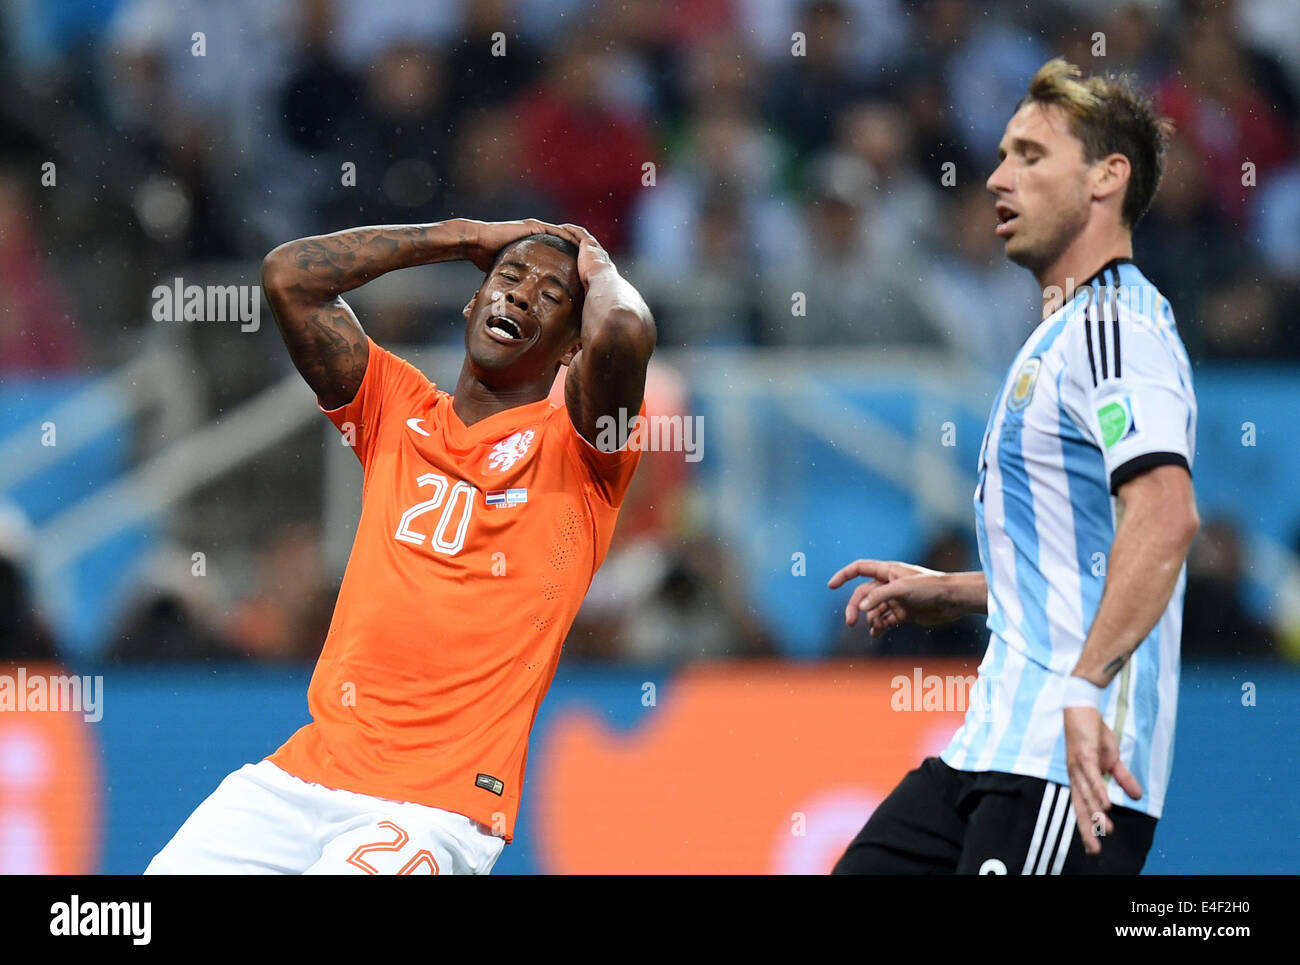 Sao Paulo, Brazil. 09th July, 2014. Georginio Wijnaldum (L) of the Netherlands reacts next to Lucas Biglia of Argentina during the FIFA World Cup 2014 semi-final soccer match between the Netherlands and Argentina at the Arena Corinthians in Sao Paulo, Brazil, 09 July 2014. Photo: Marius Becker/dpa/Alamy Live News Stock Photo